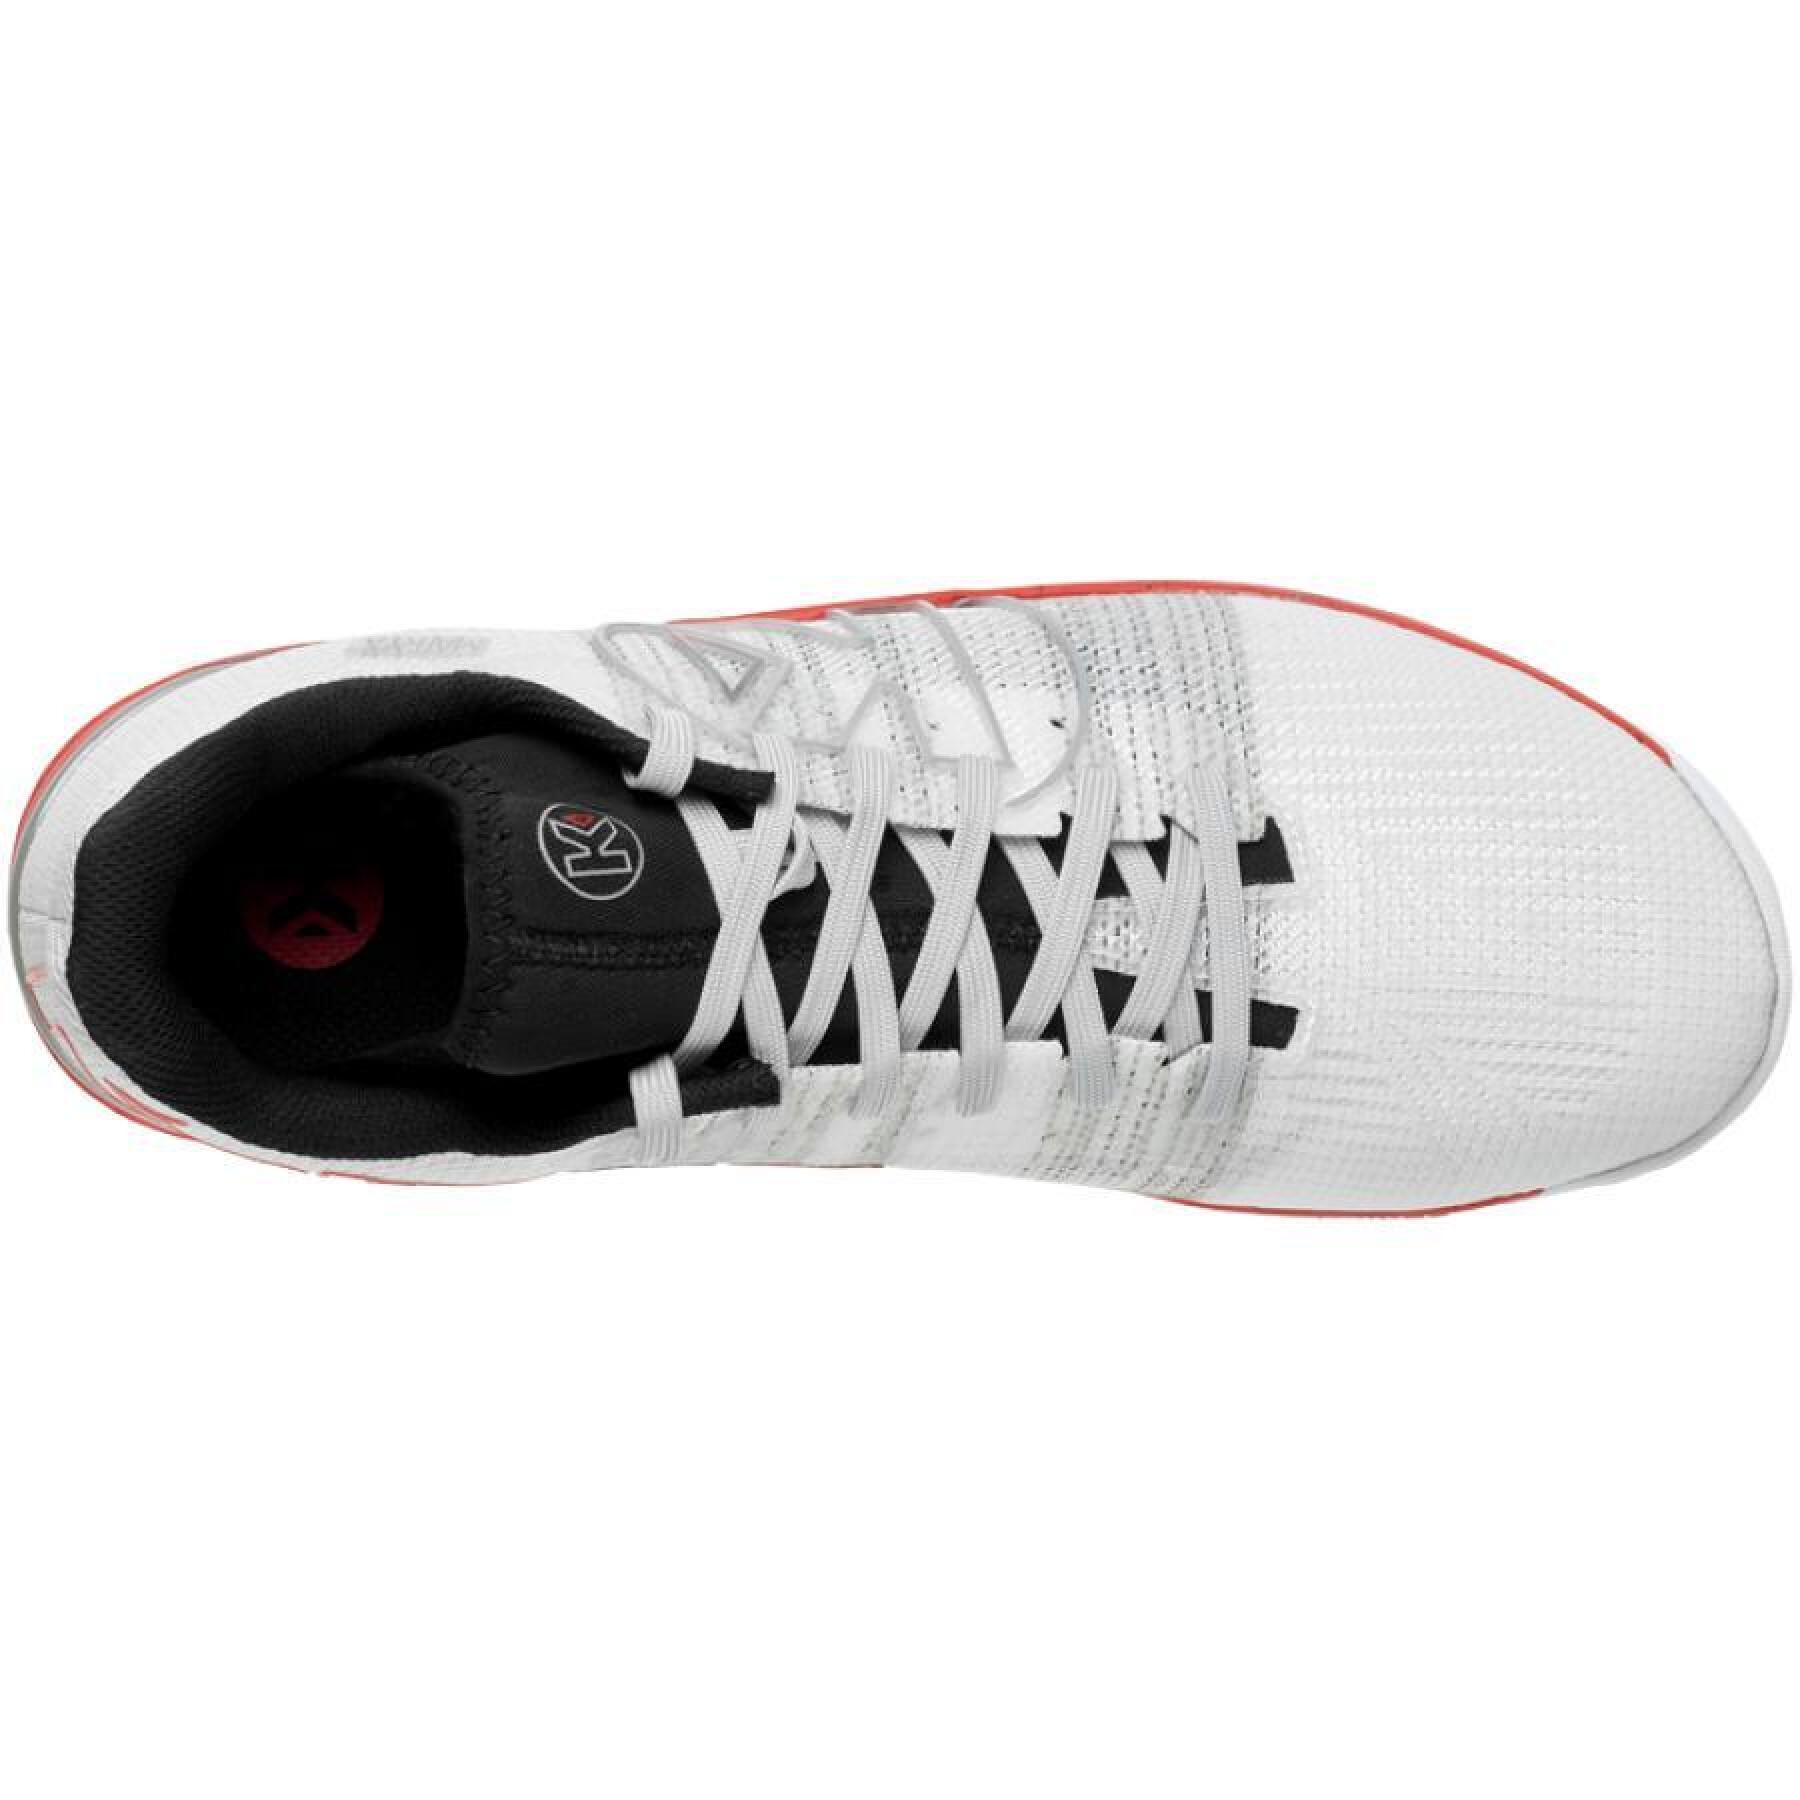 Shoes indoor Kempa Attack One 2.0